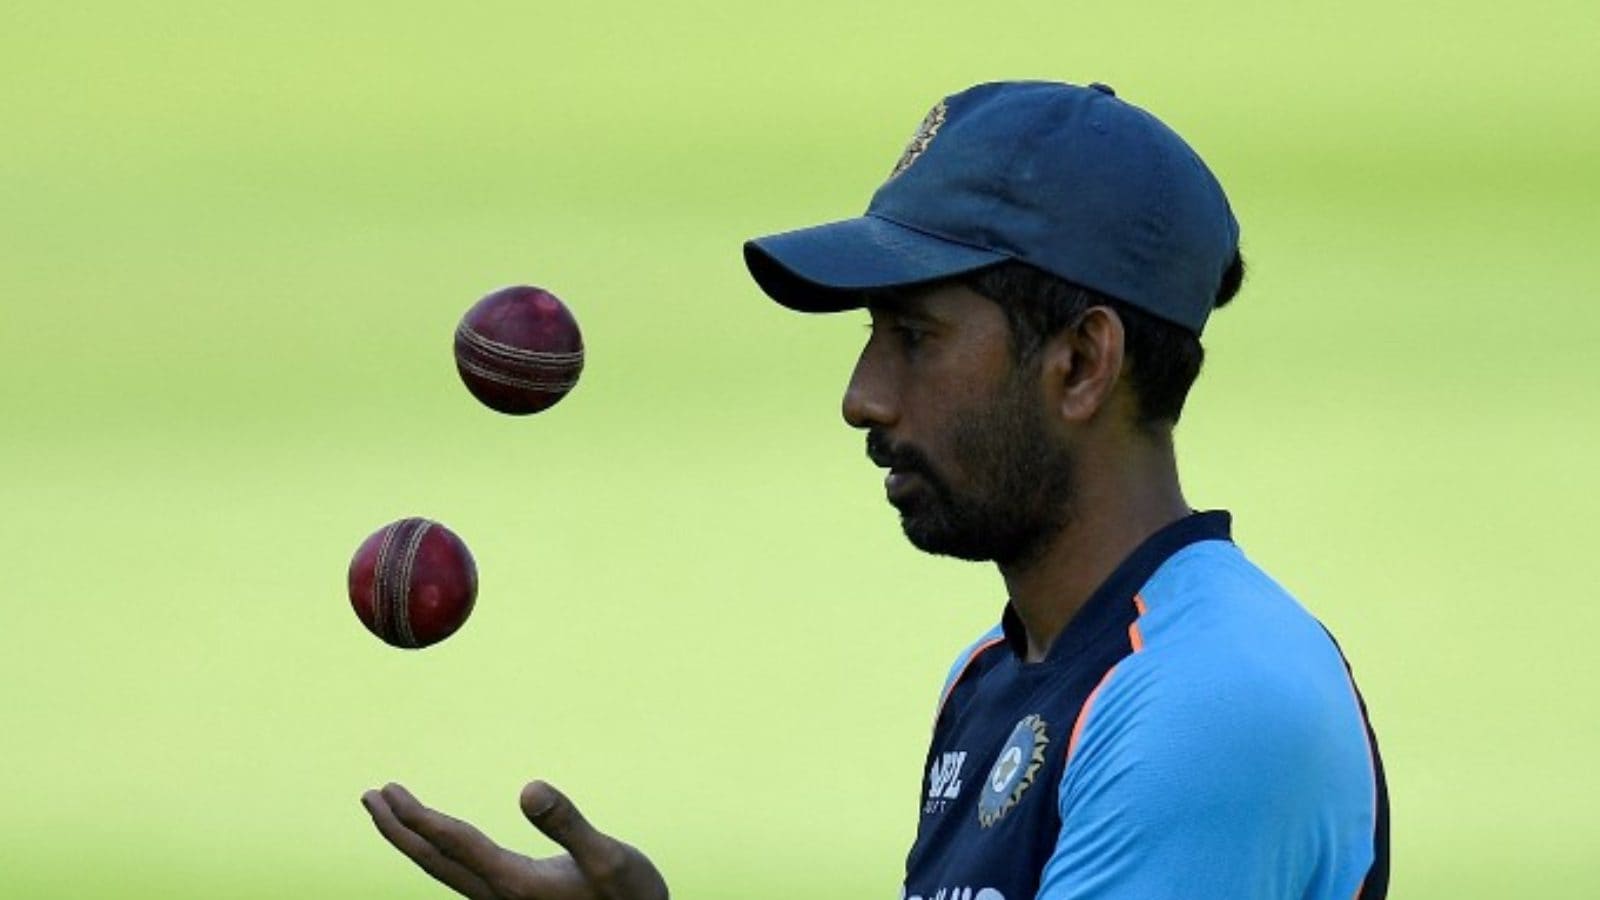 ‘He’s 37, But his fitness and Performance Are Alright’-Wriddhiman Saha Childhood Coach